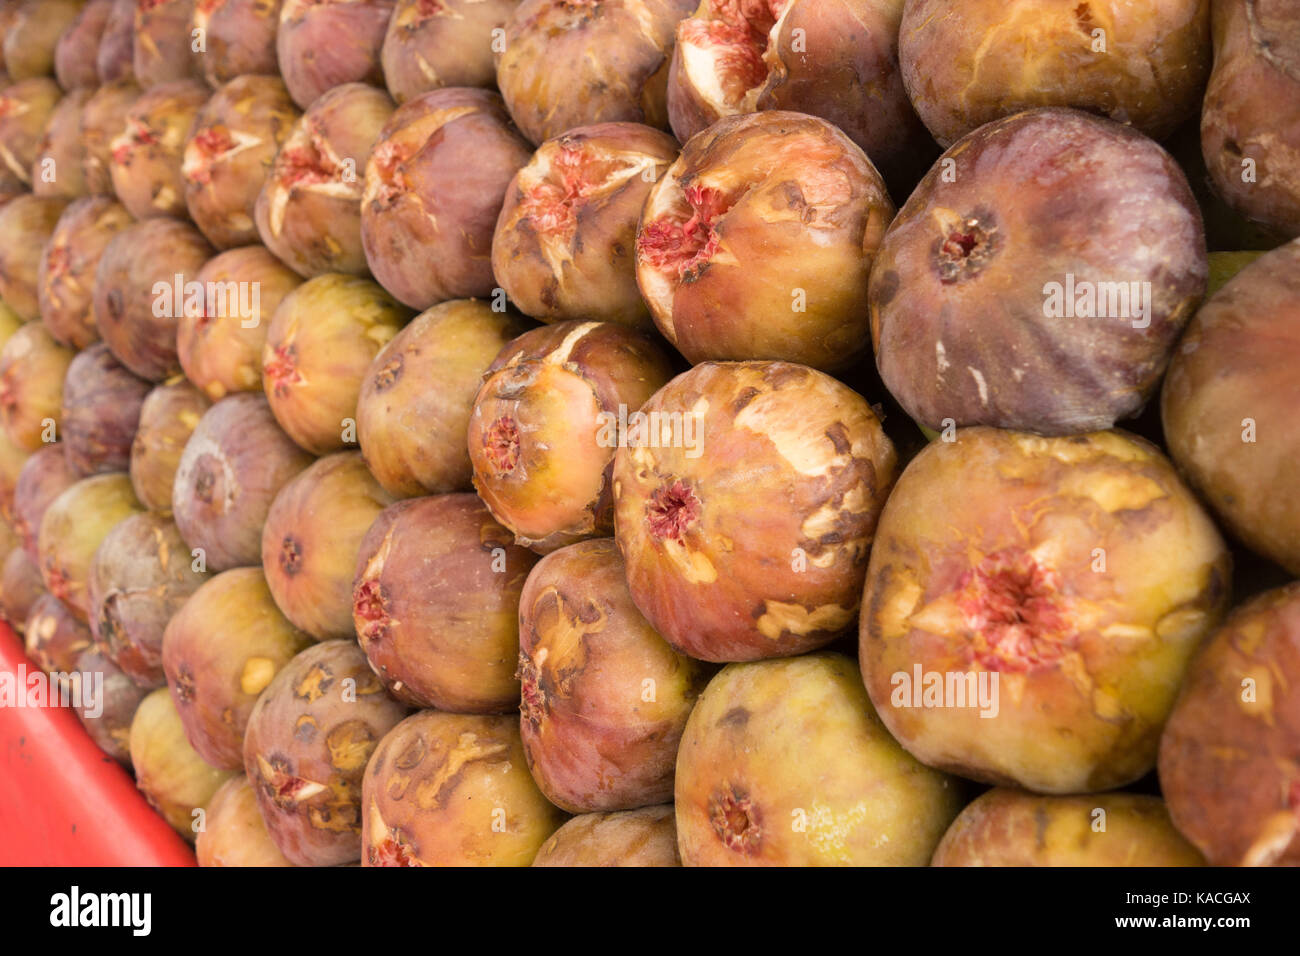 HYDERABAD,INDIA-25th SEPTEMBER,2017.Common Figs neatly arranged in layers for Sale by a street fruit vendor in Hyderabad,India Stock Photo